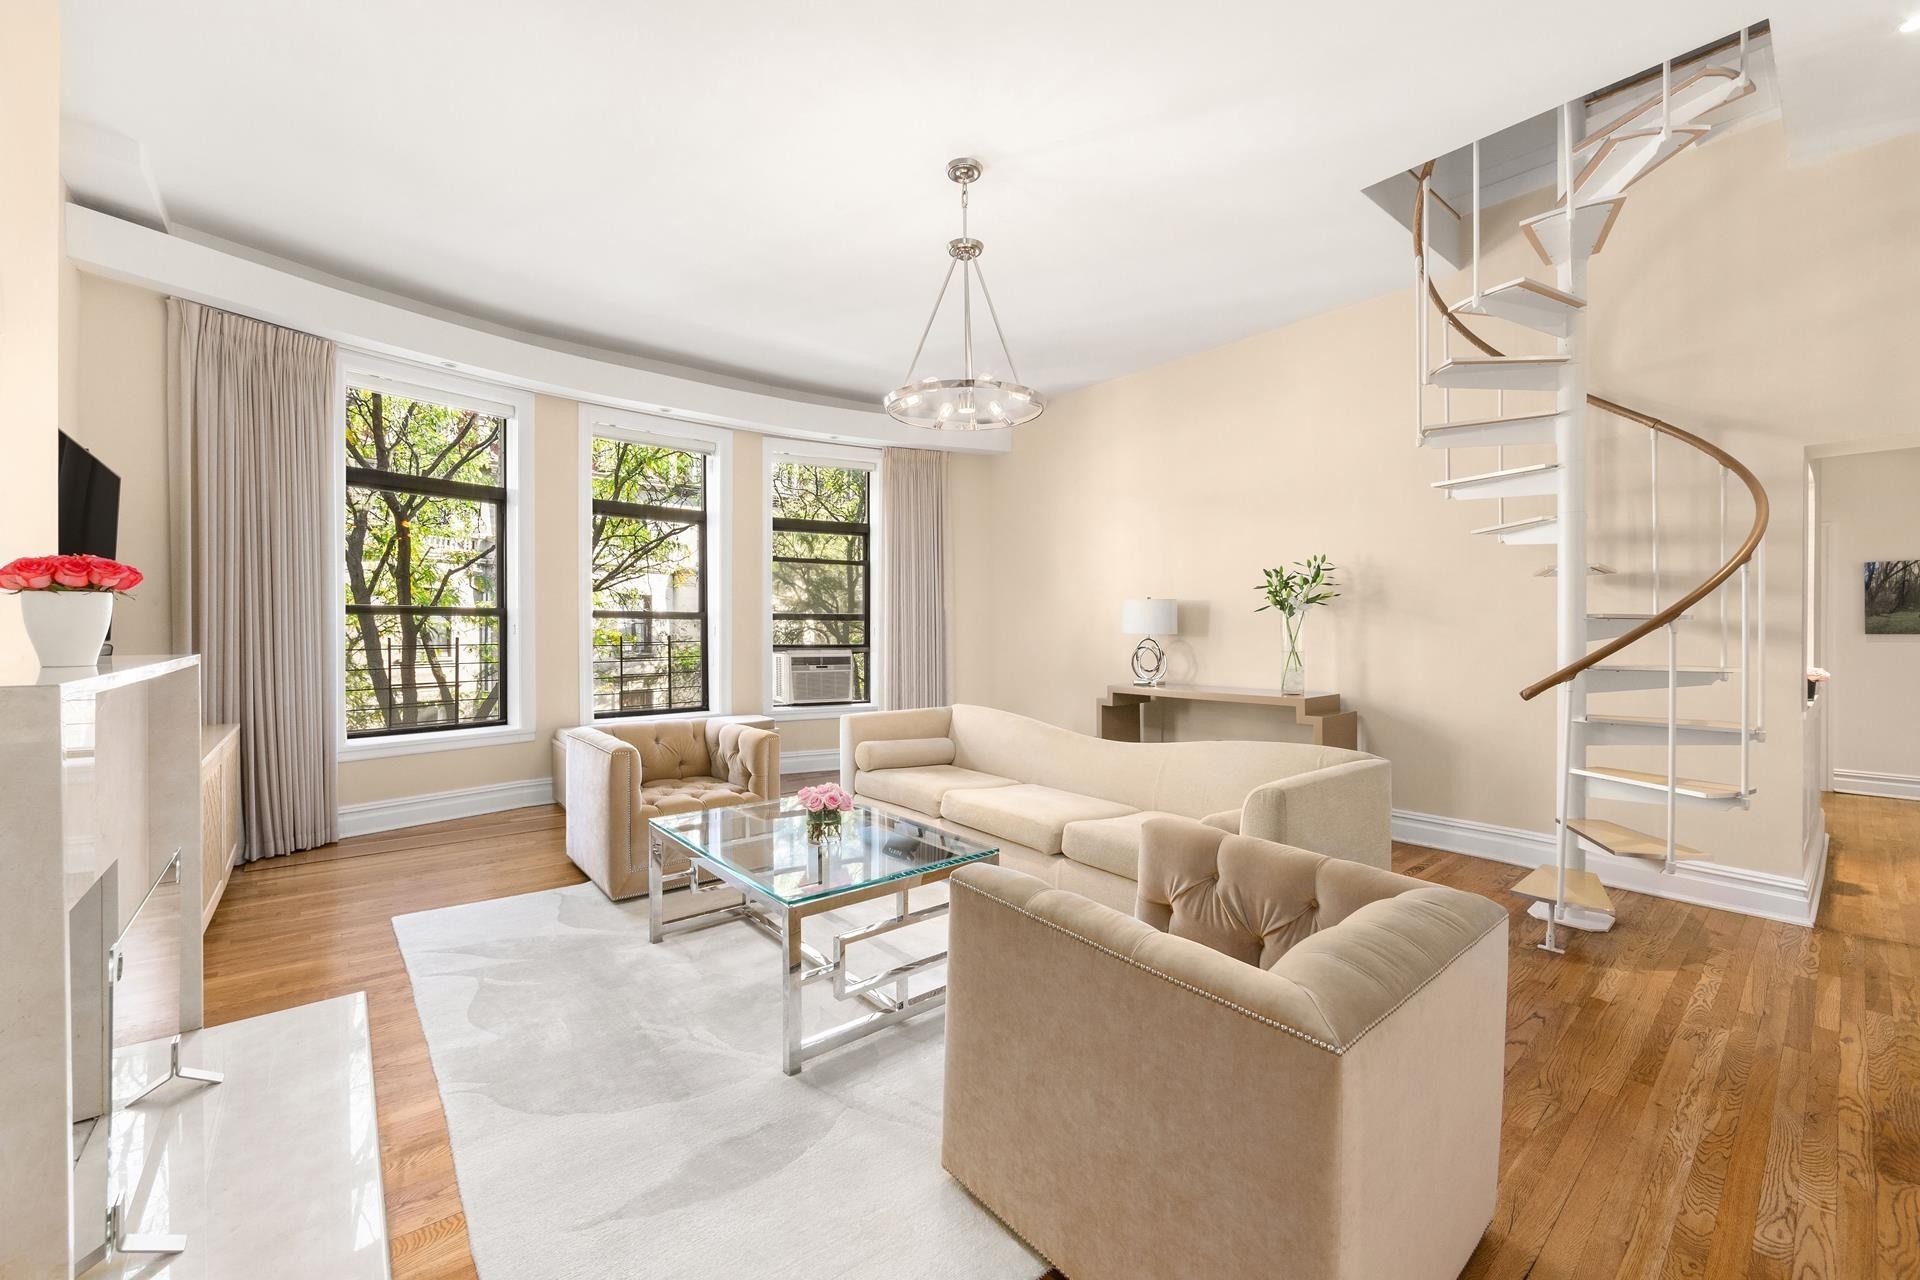 Co-op Properties for Sale at 312 W 107TH ST, 3B/4B Upper West Side, New York, NY 10025